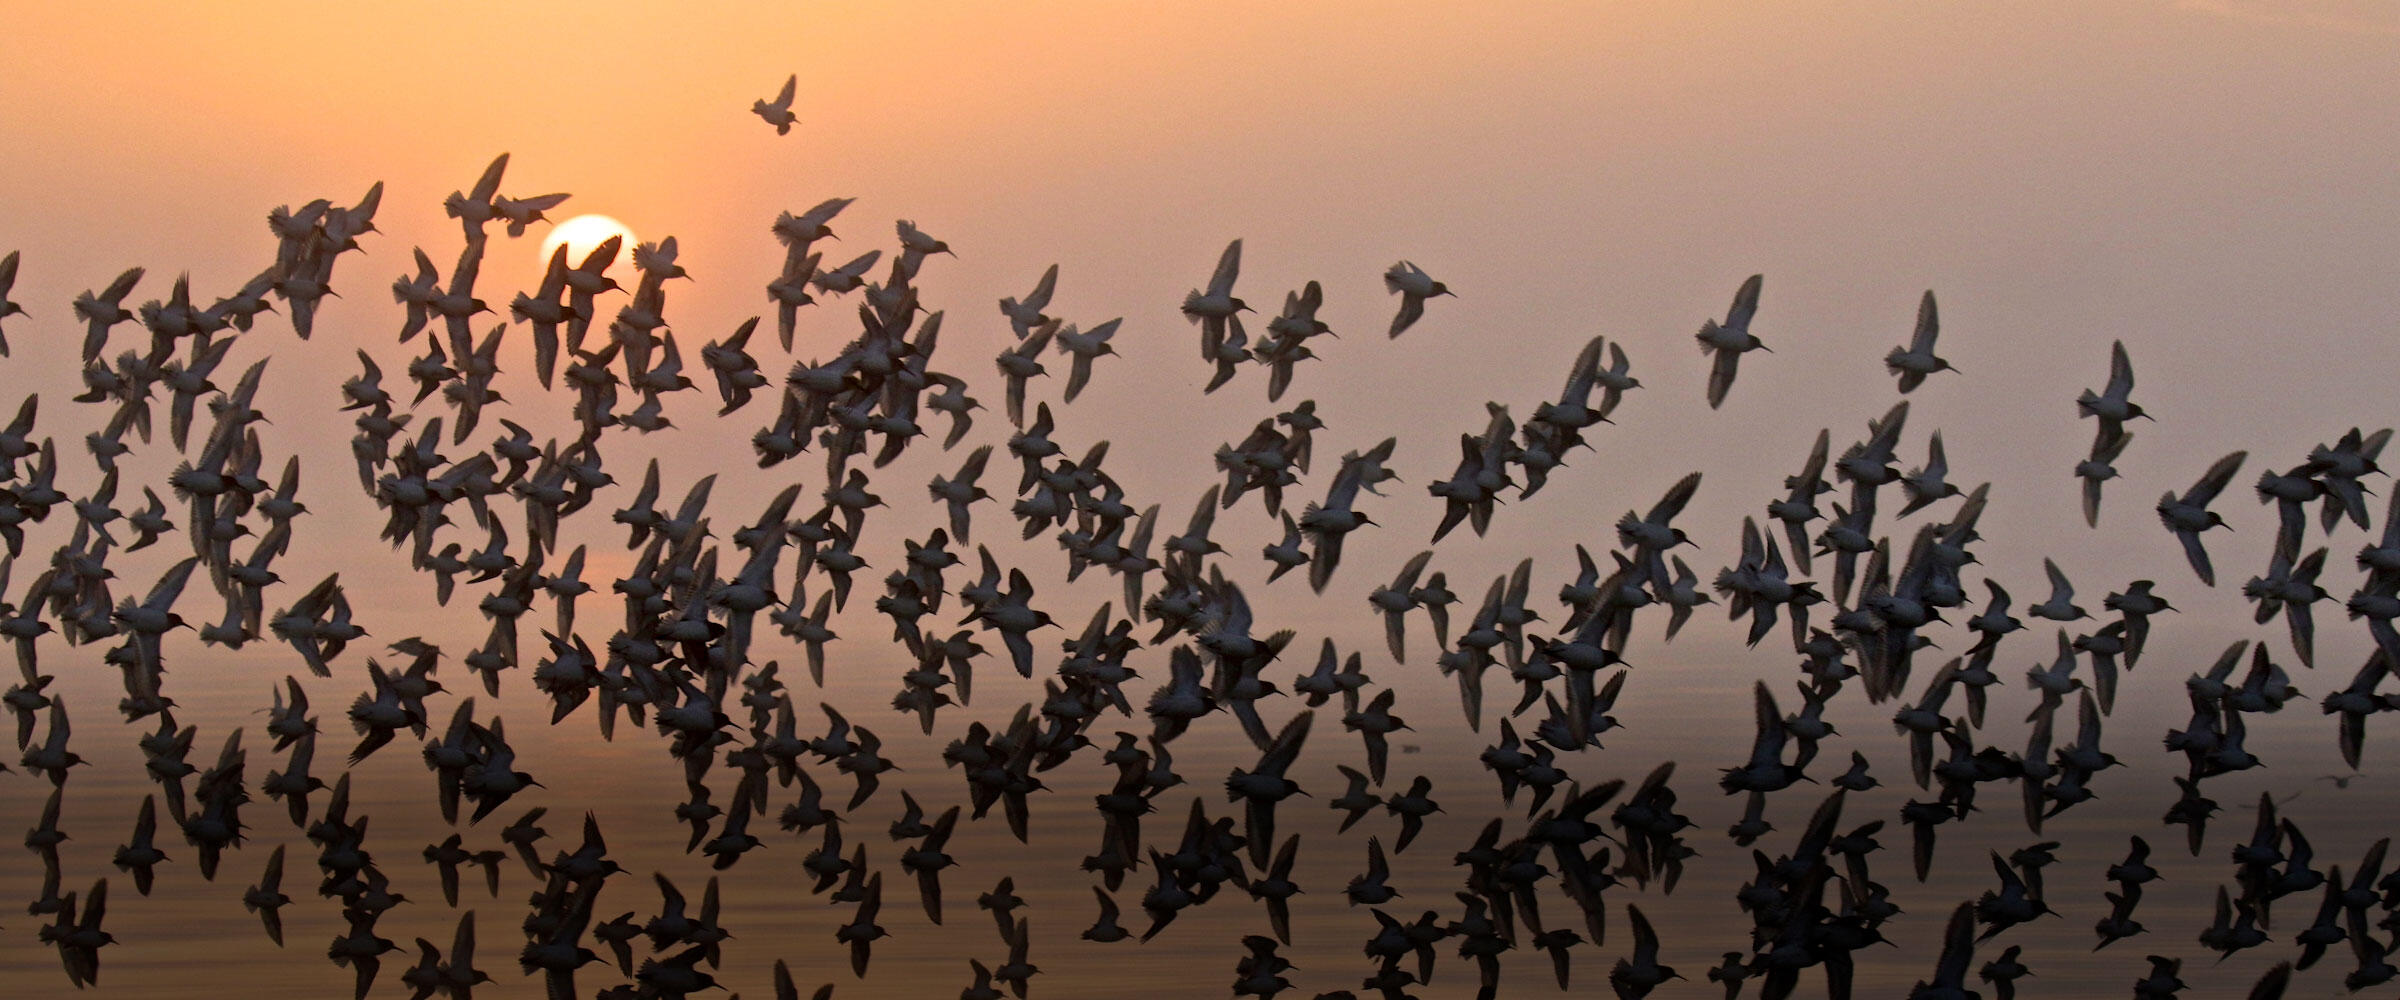 Flock of sandpipers over a lake at sunset.